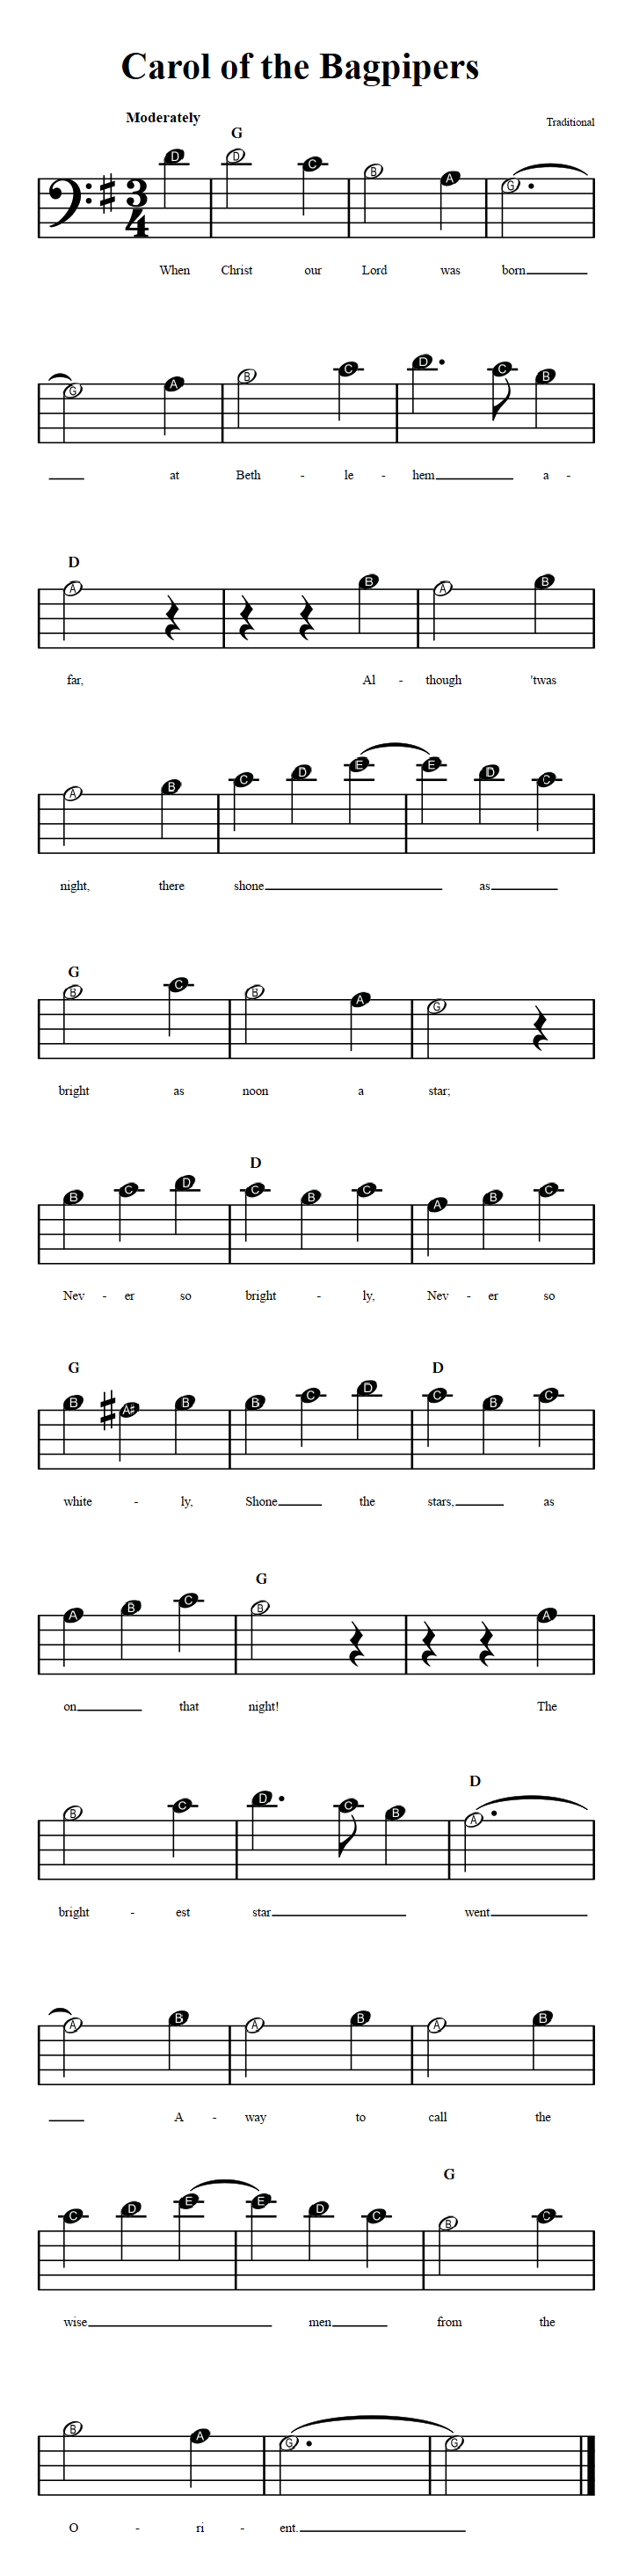 Carol of the Bagpipers  Beginner Bass Clef Sheet Music